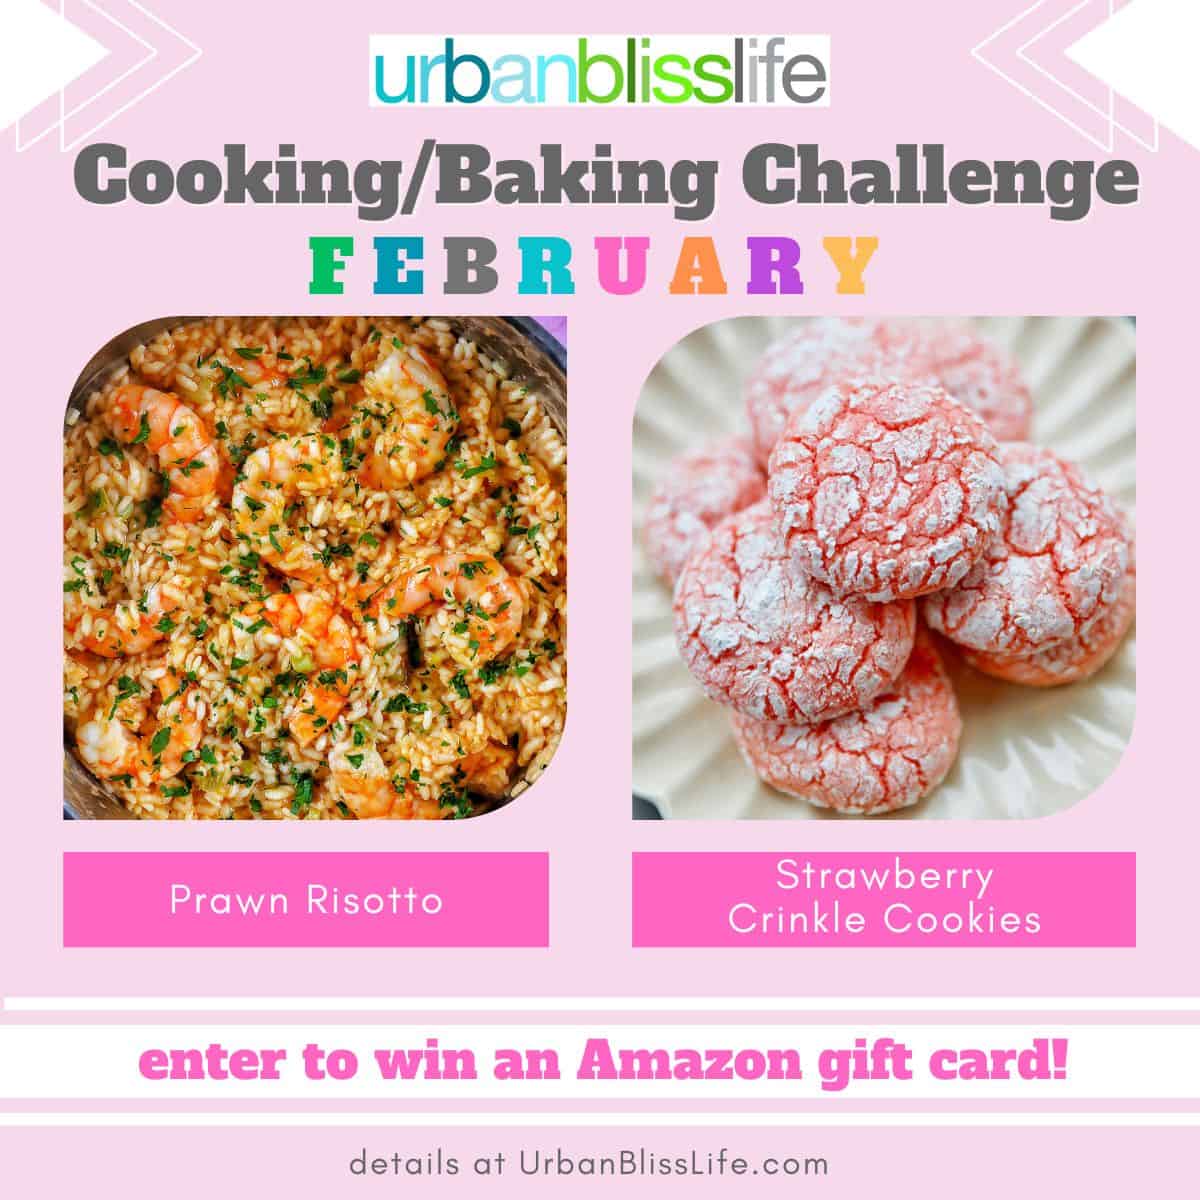 February baking and cooking challenge graphic with photos of risotto with prawns and strawberry crinkle cookies.